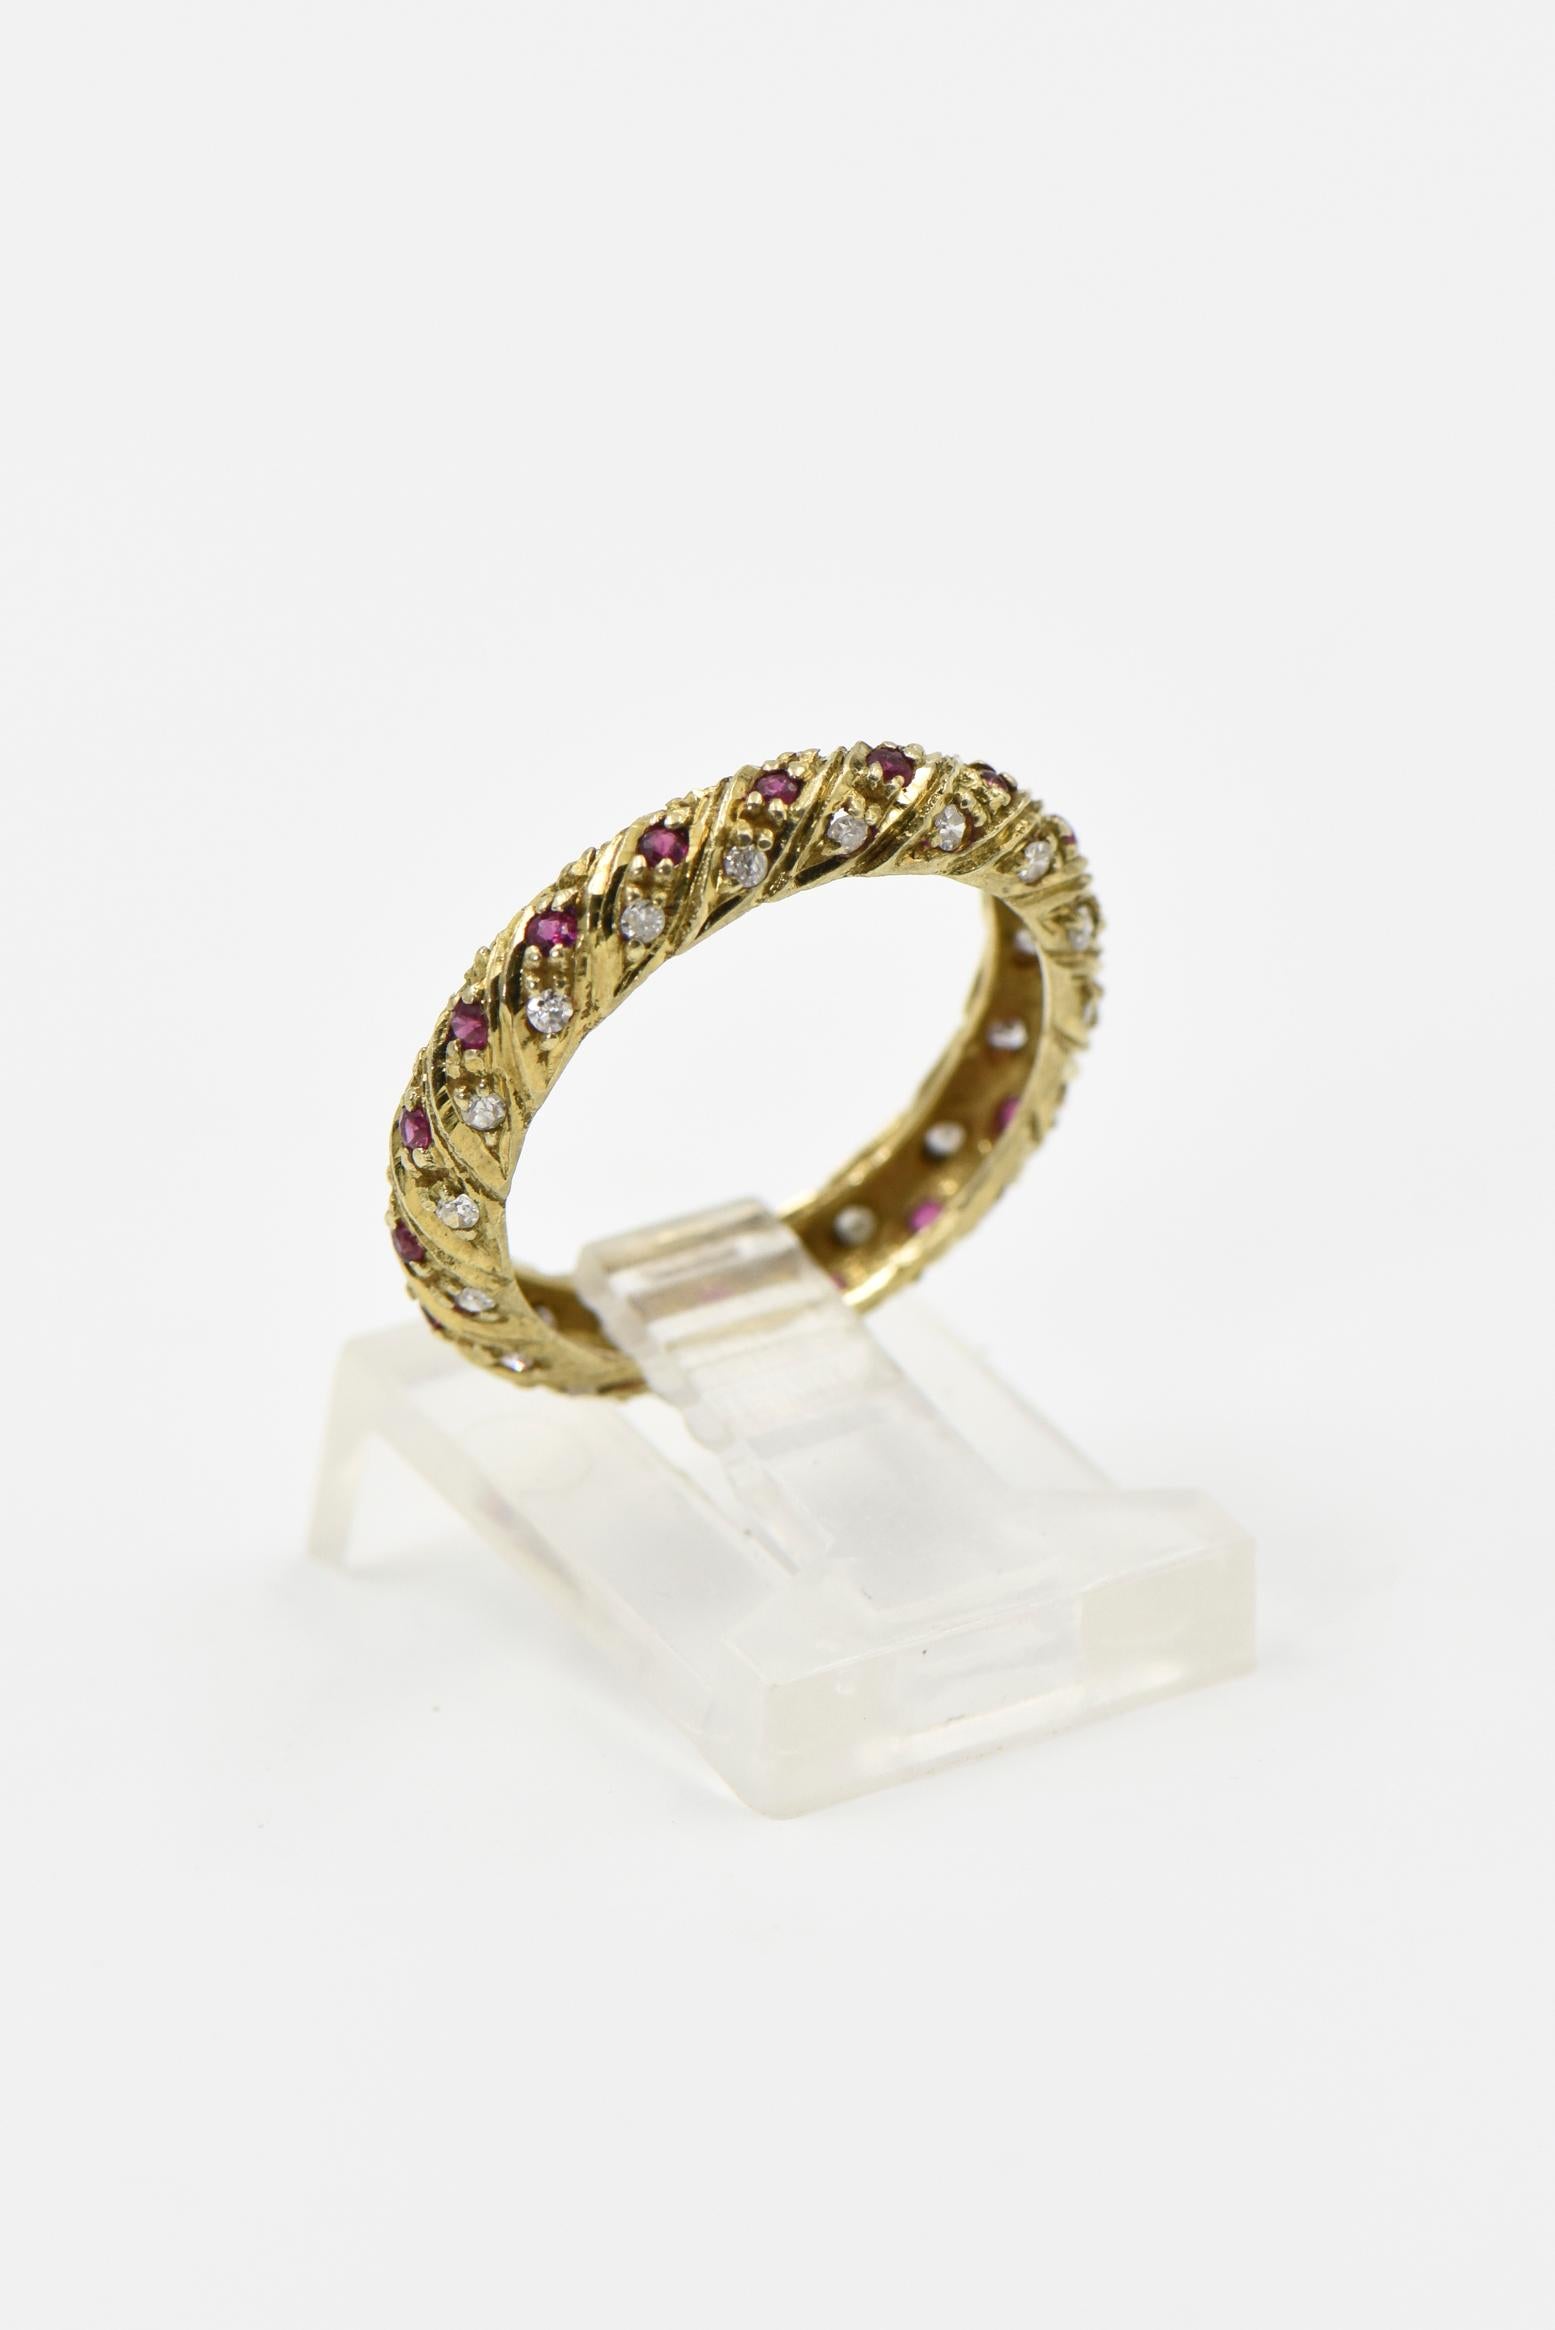 Set of Ruby Emerald Sapphire Stacking Gold Bands with Diamonds For Sale 1